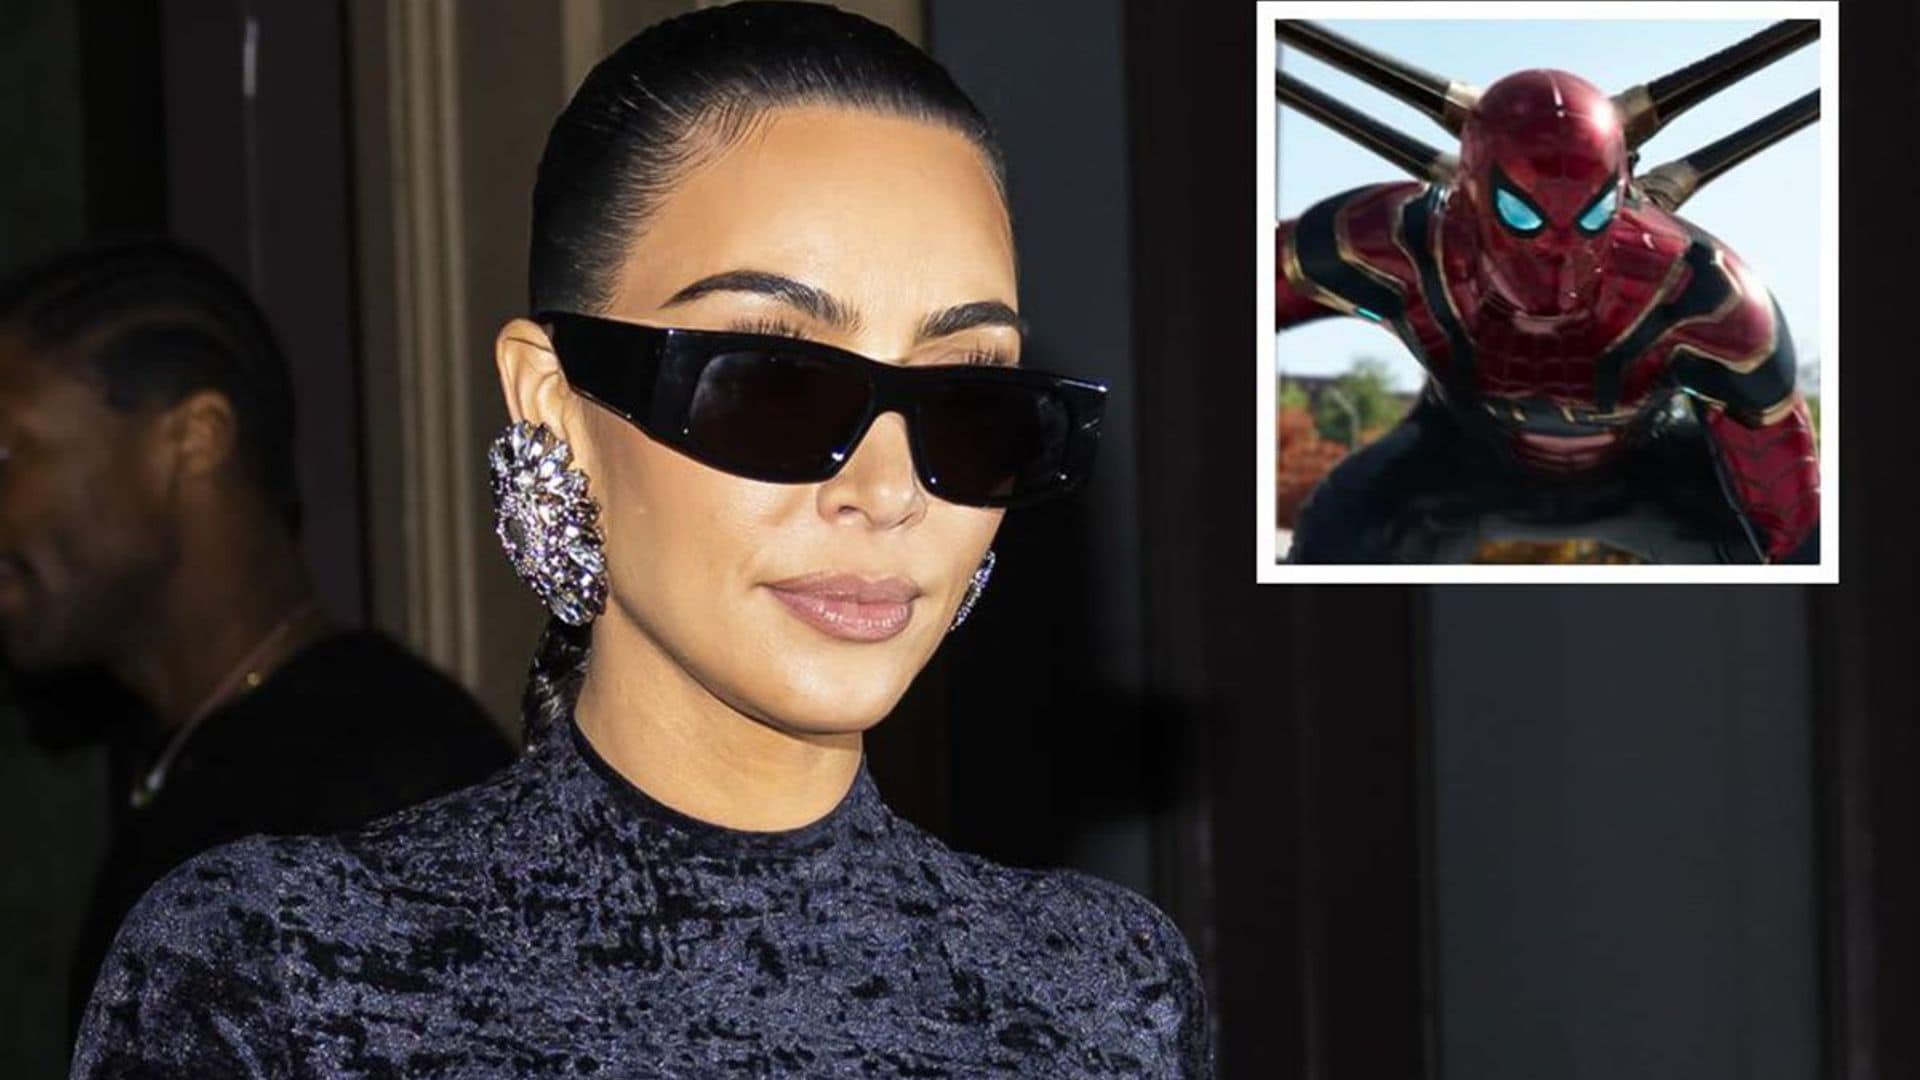 Kim Kardashian spoiling ‘Spider-Man: No Way Home’ is one of the funniest scandals the family has ever had